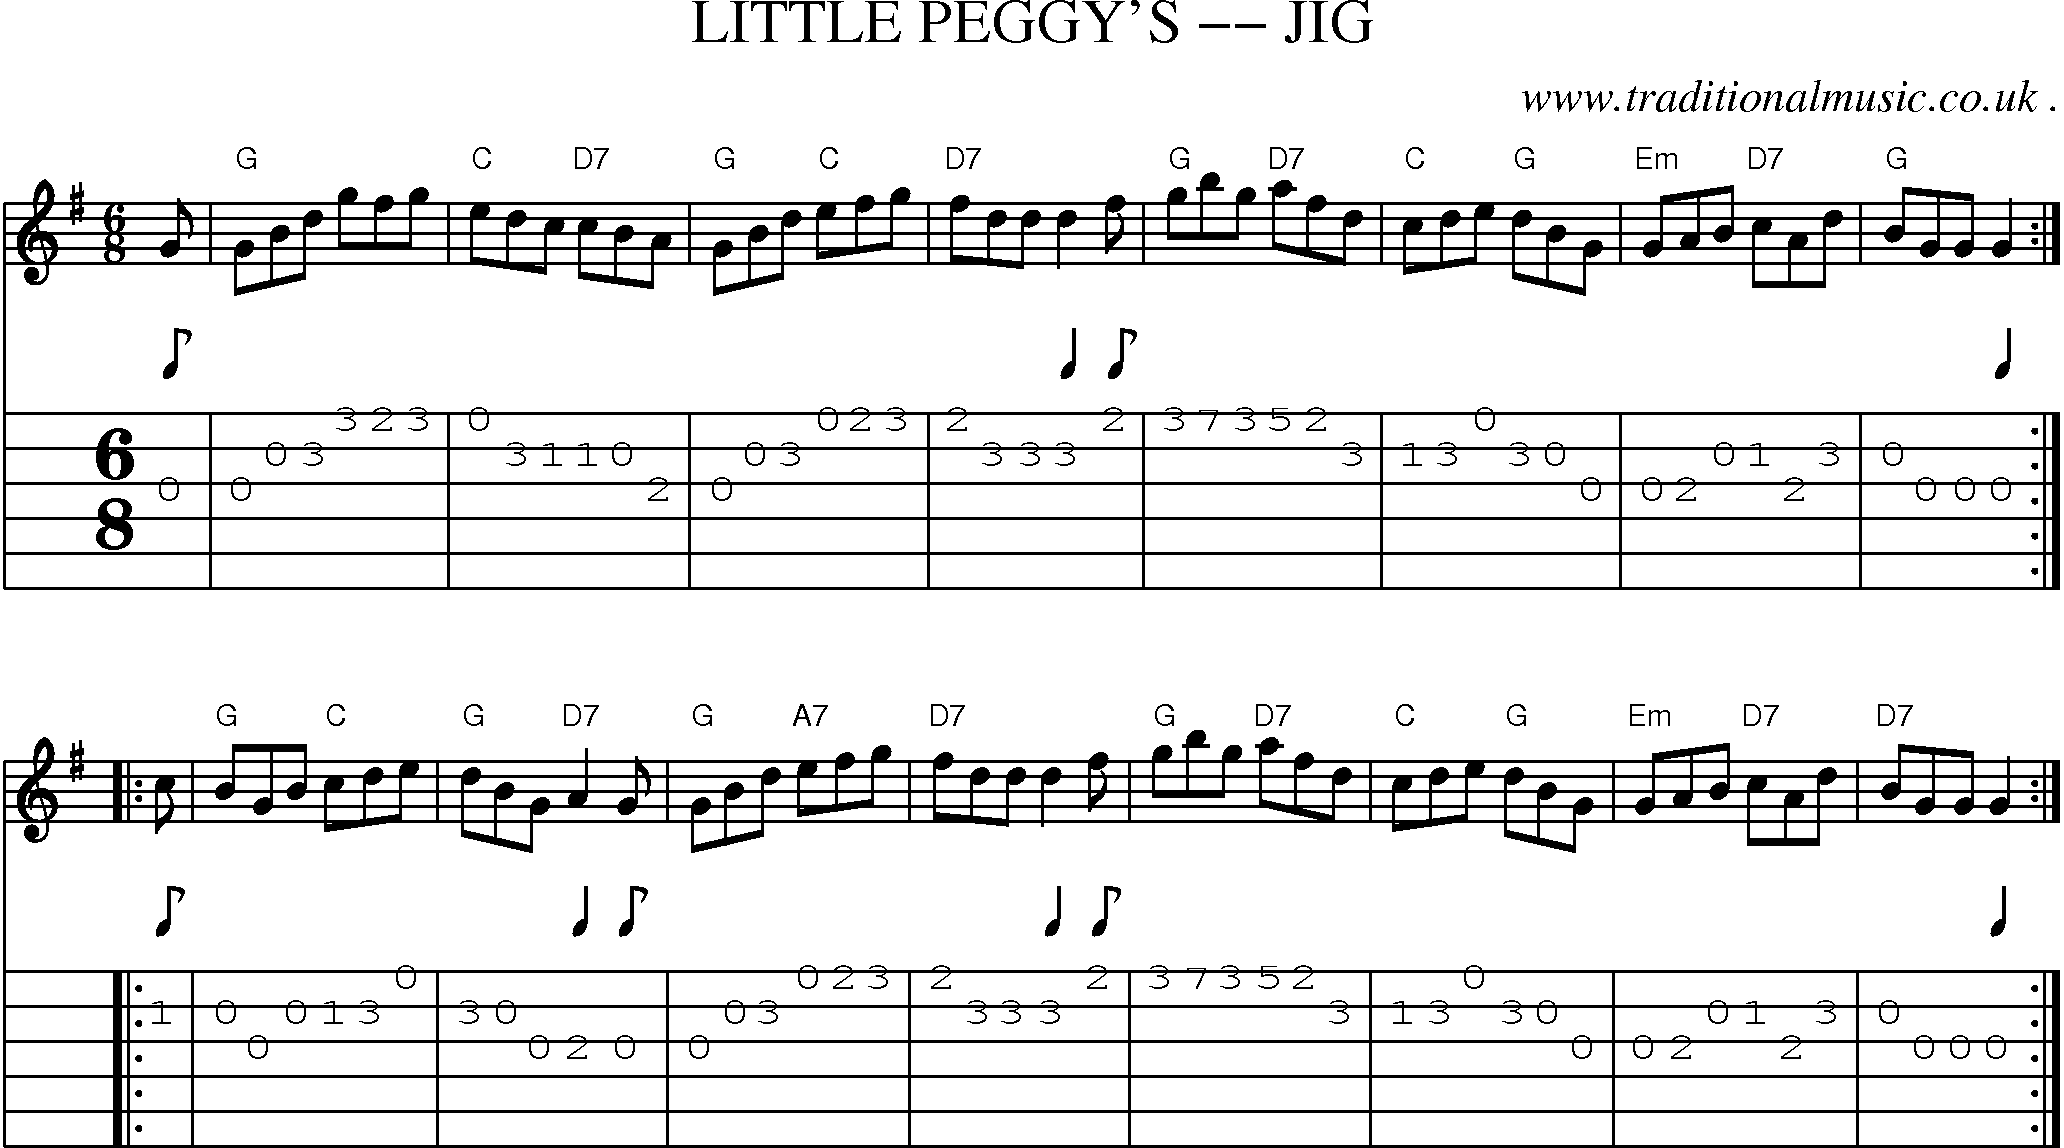 Sheet-music  score, Chords and Guitar Tabs for Little Peggys -- Jig